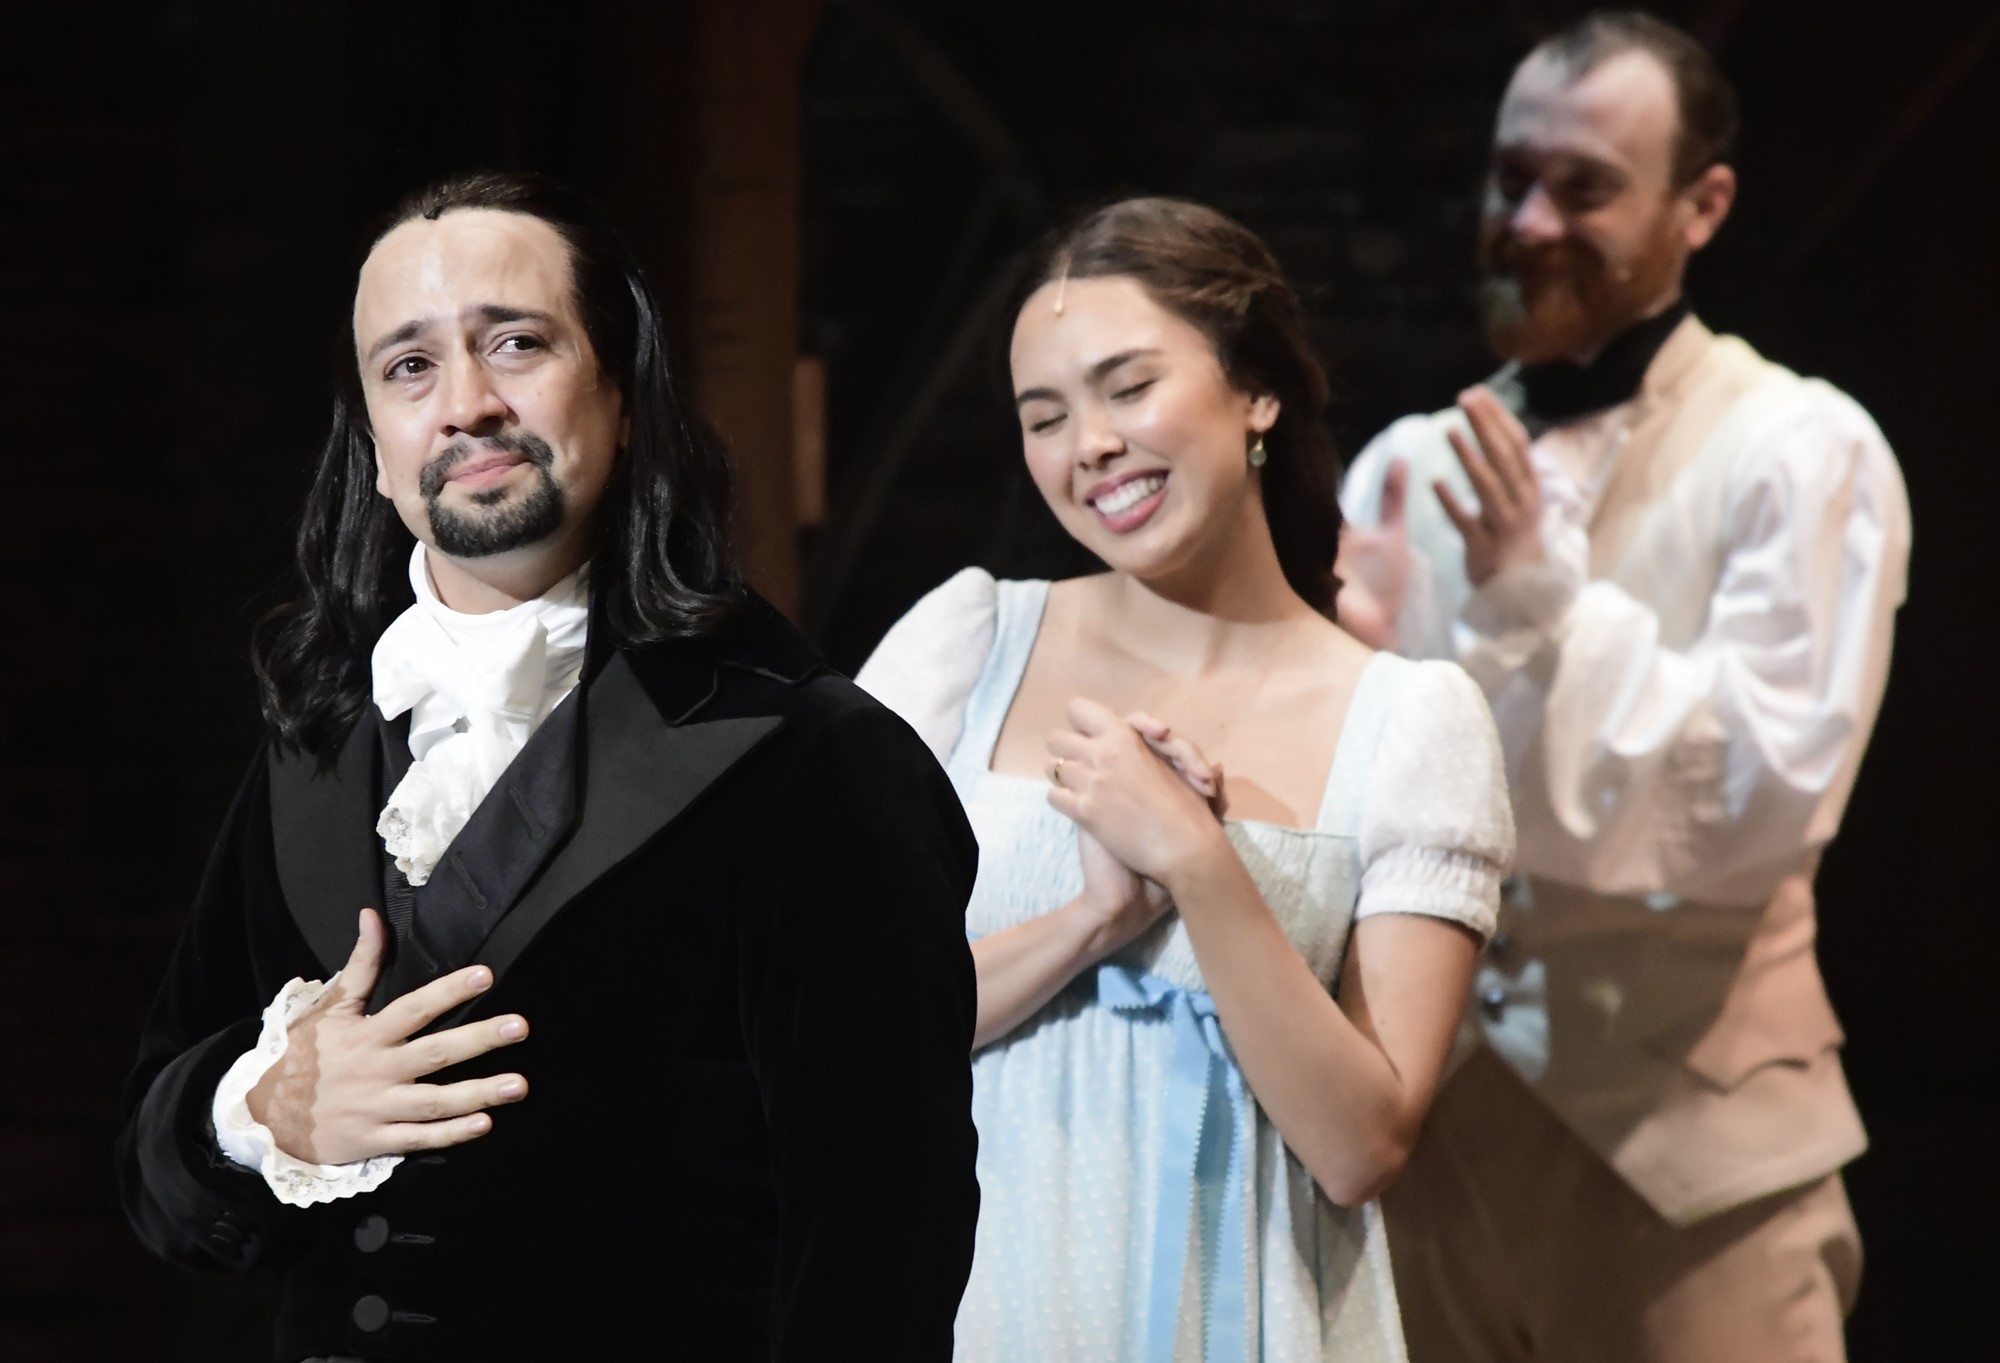 Lin-Manuel Miranda in Hamilton costume stands with hand on chest as two other actors clap